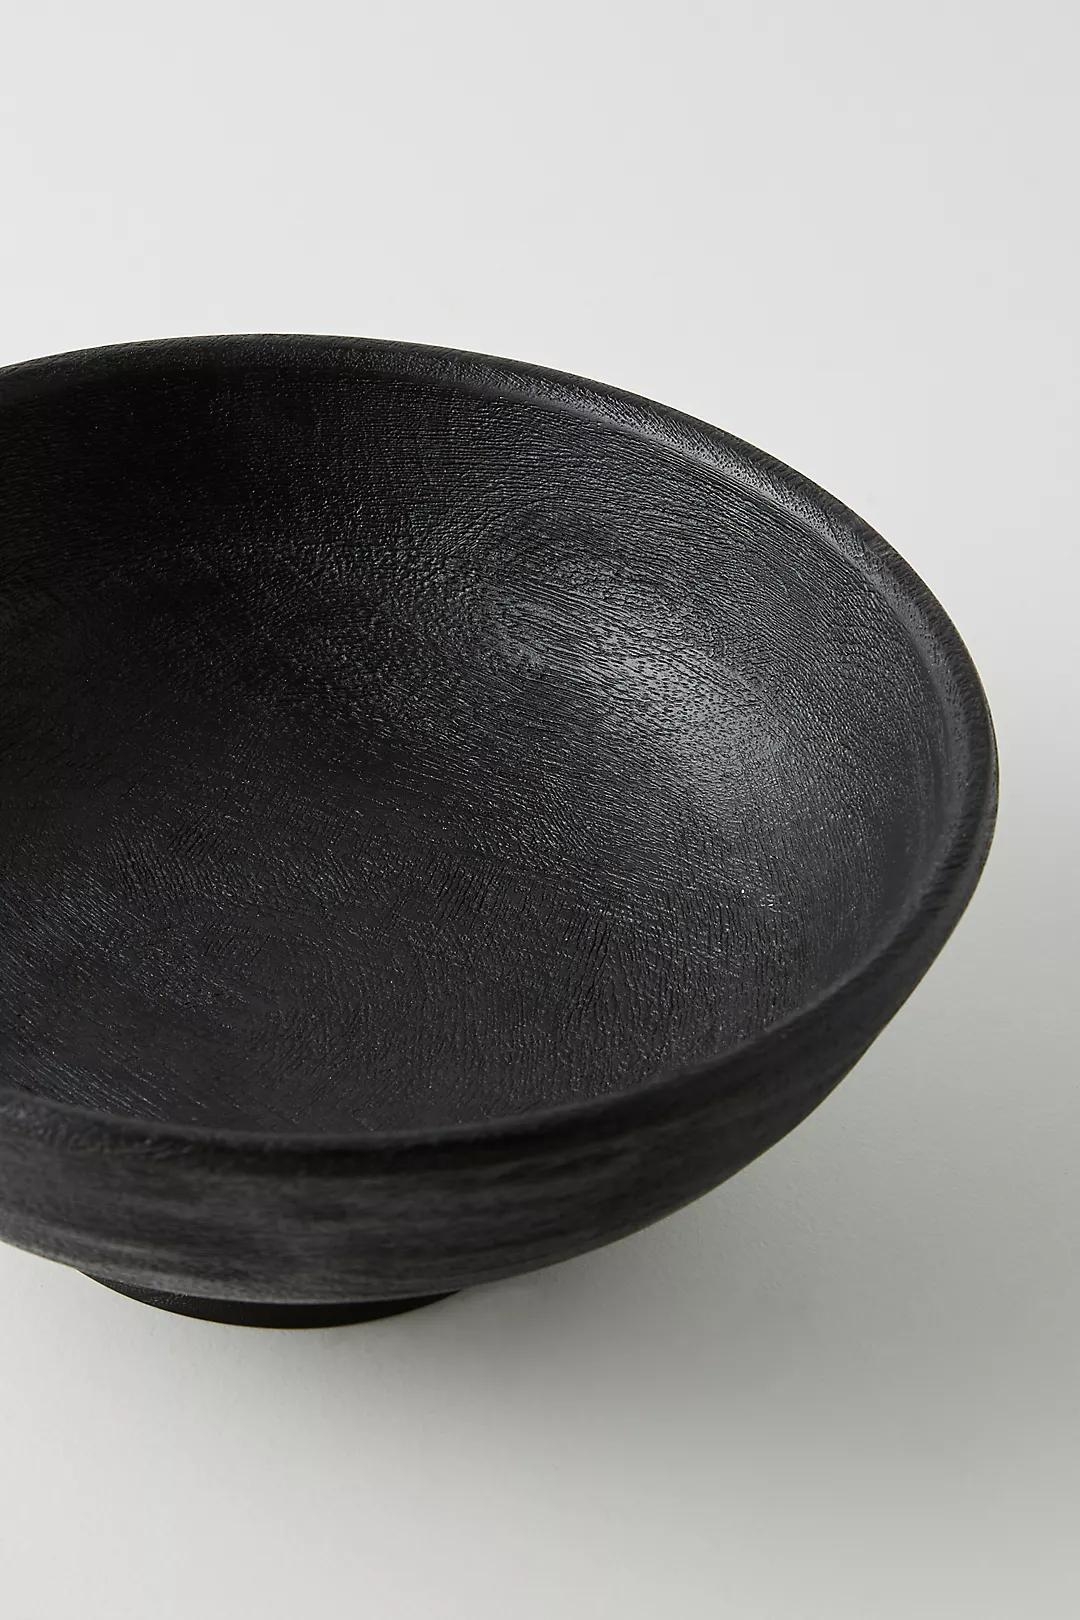 Ayla Decorative Bowl By Anthropologie in Black - Image 1